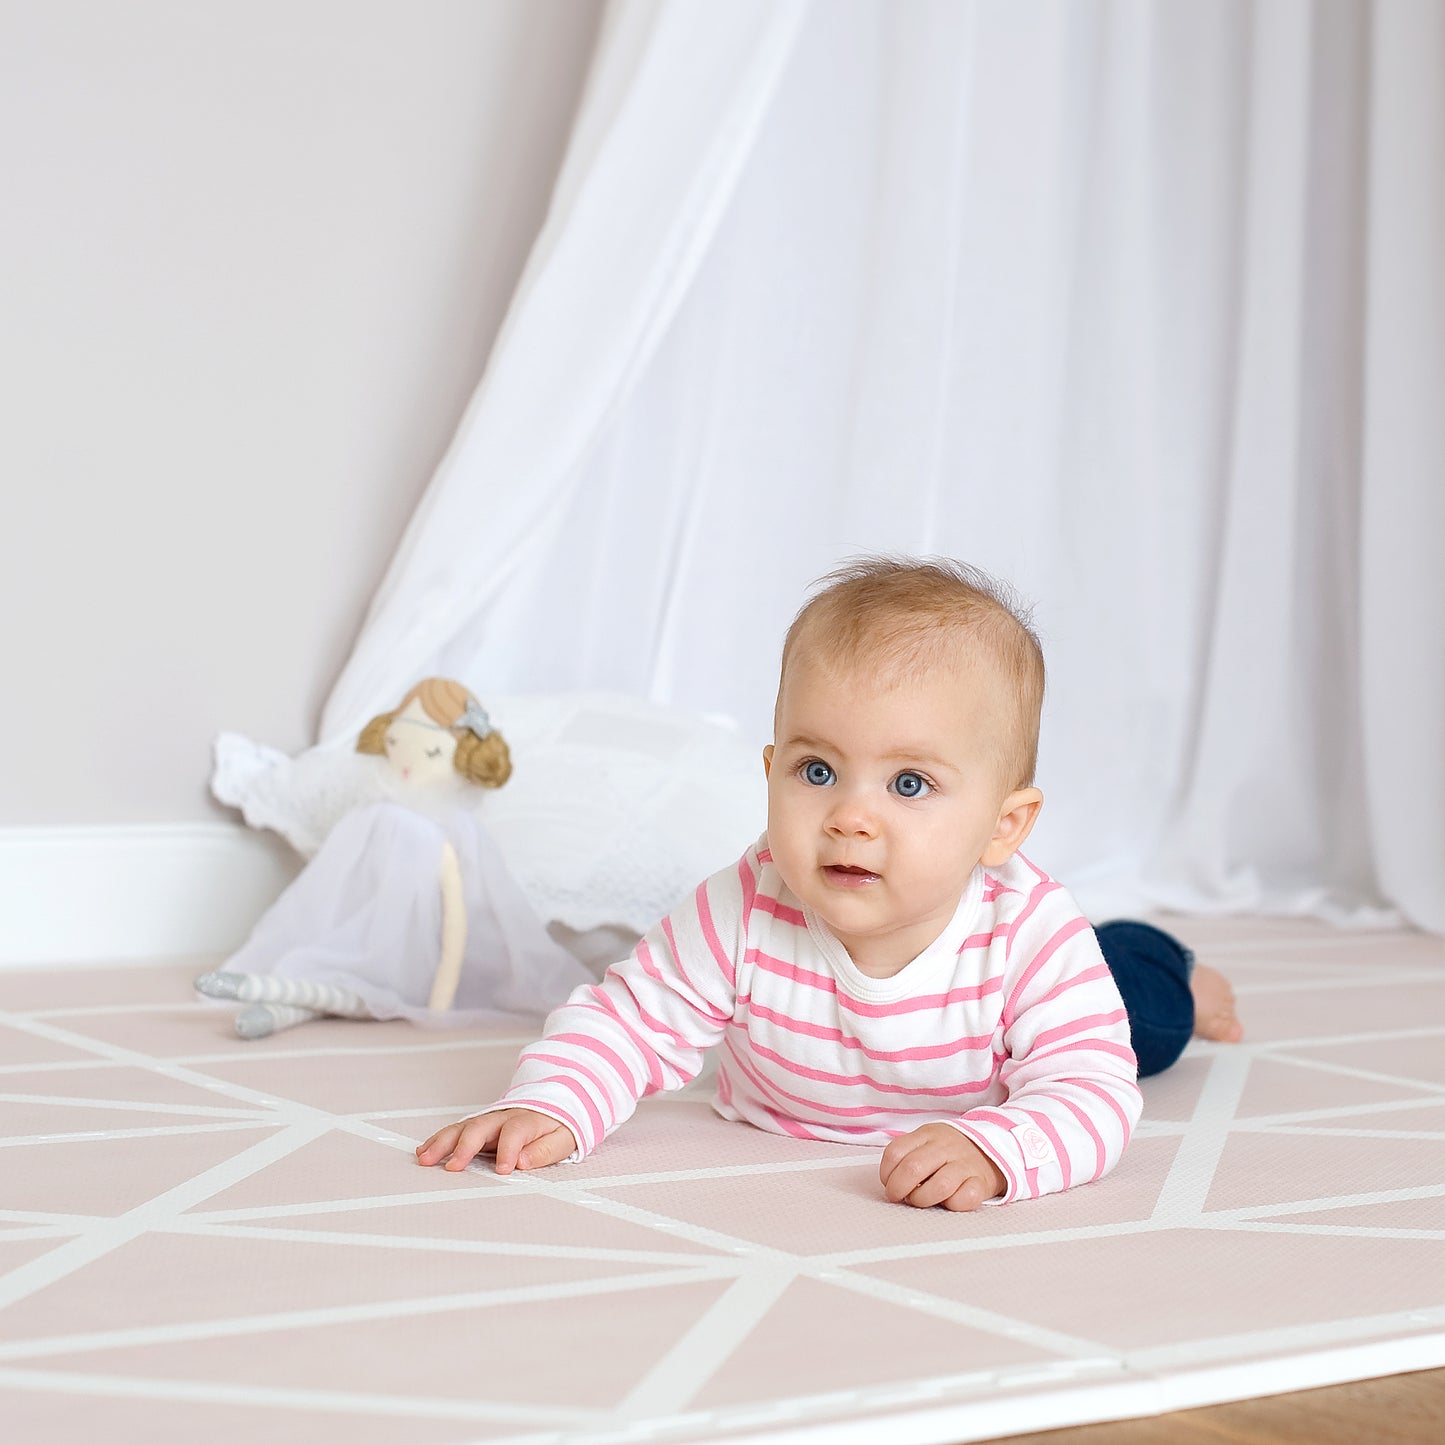 Nordic Puzzle Playmat in Vintage Nude